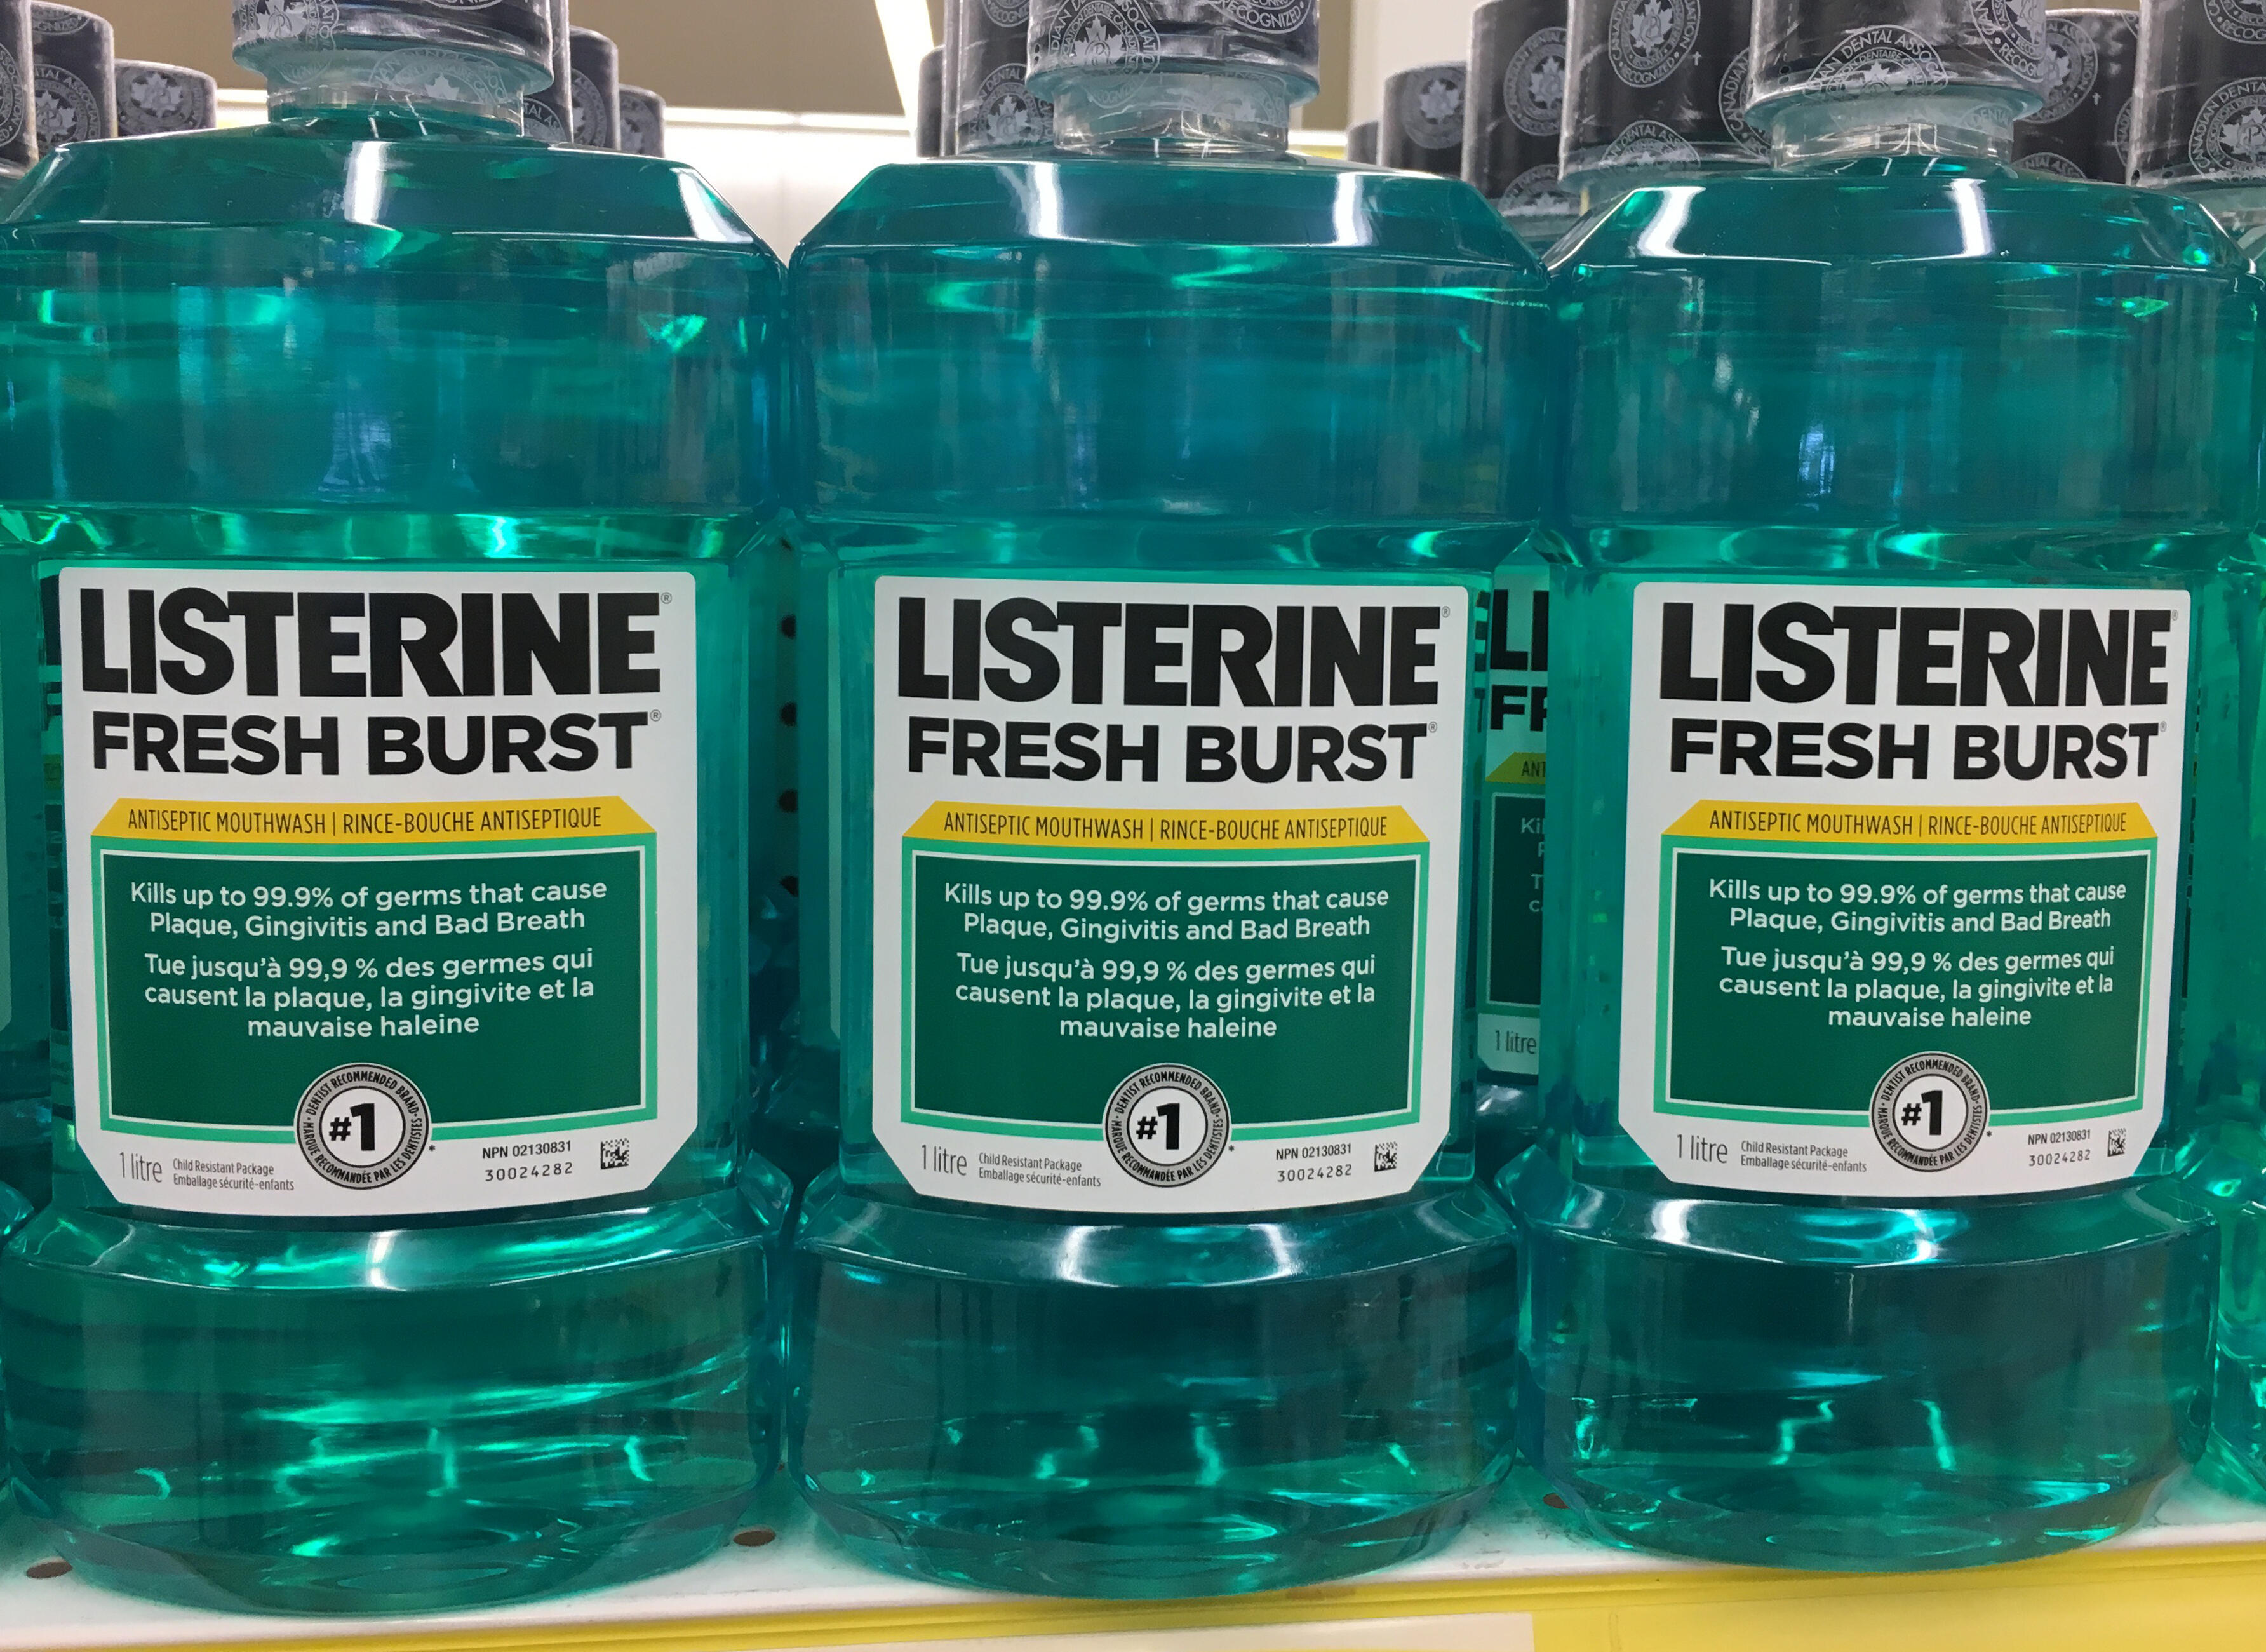 TORONTO, ONTARIO, CANADA - 2016/10/11: Listerine mouthwash in store shelf. Listerine is a brand of antiseptic mouthwash product. It is promoted with the slogan 